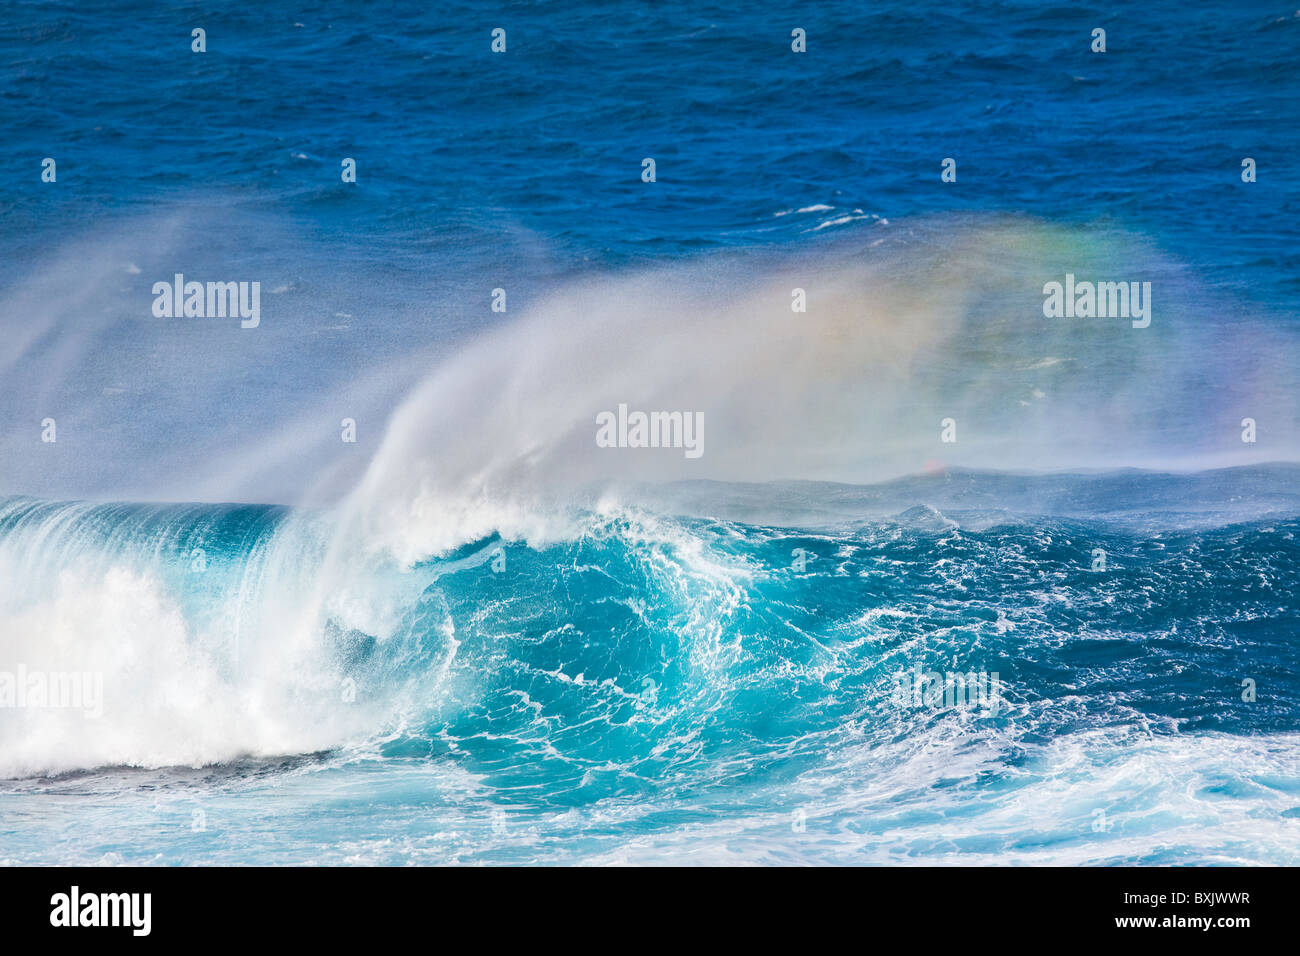 Huge breaking wave with a nice tube and a rainbow in the spray. Stock Photo